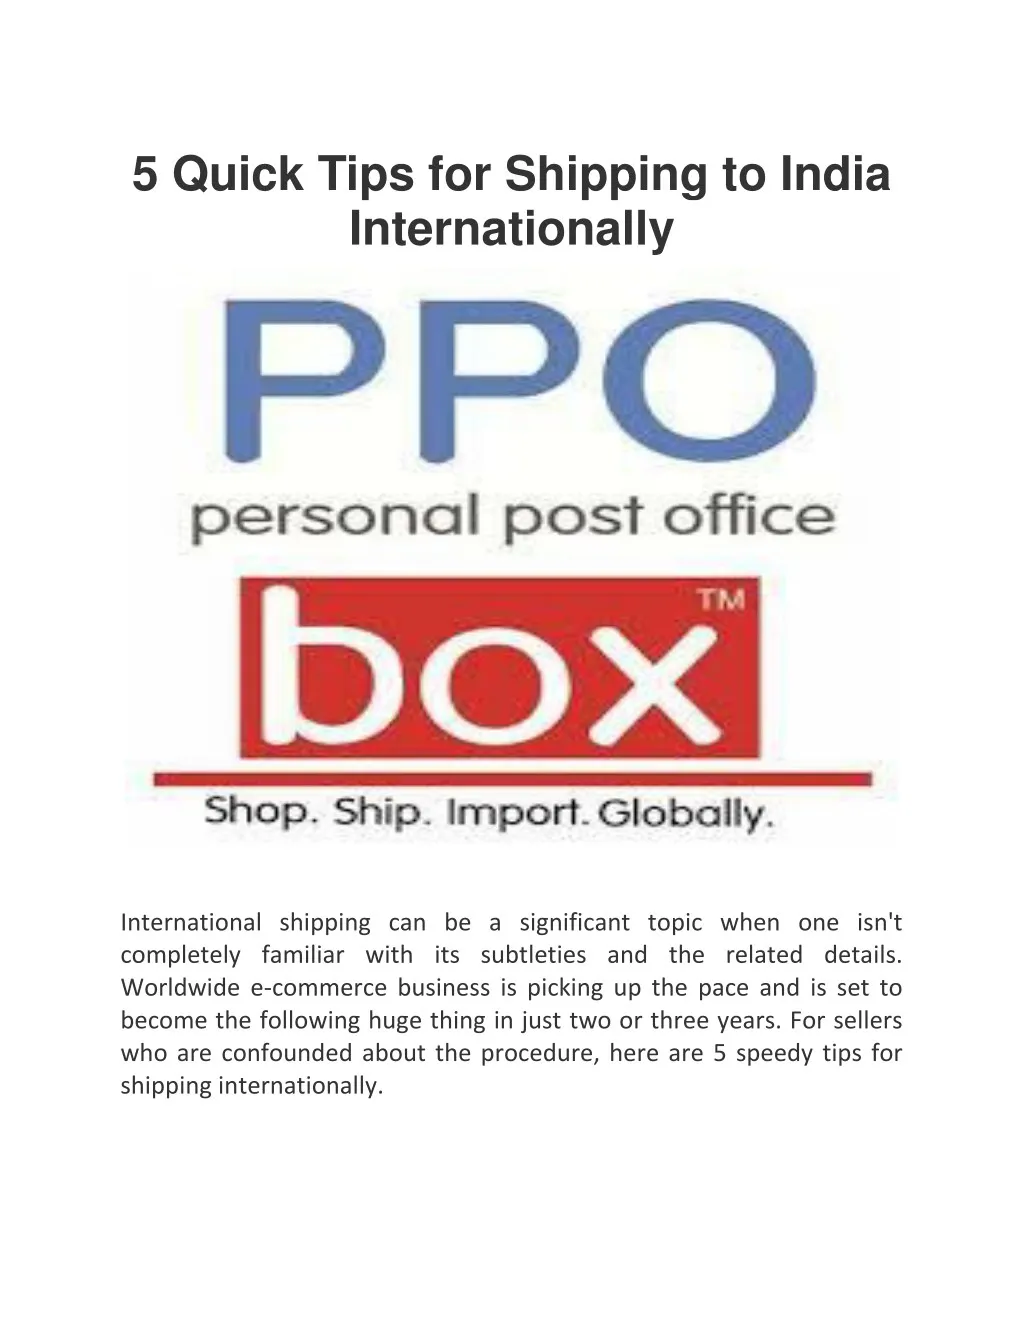 5 quick tips for shipping to india internationally